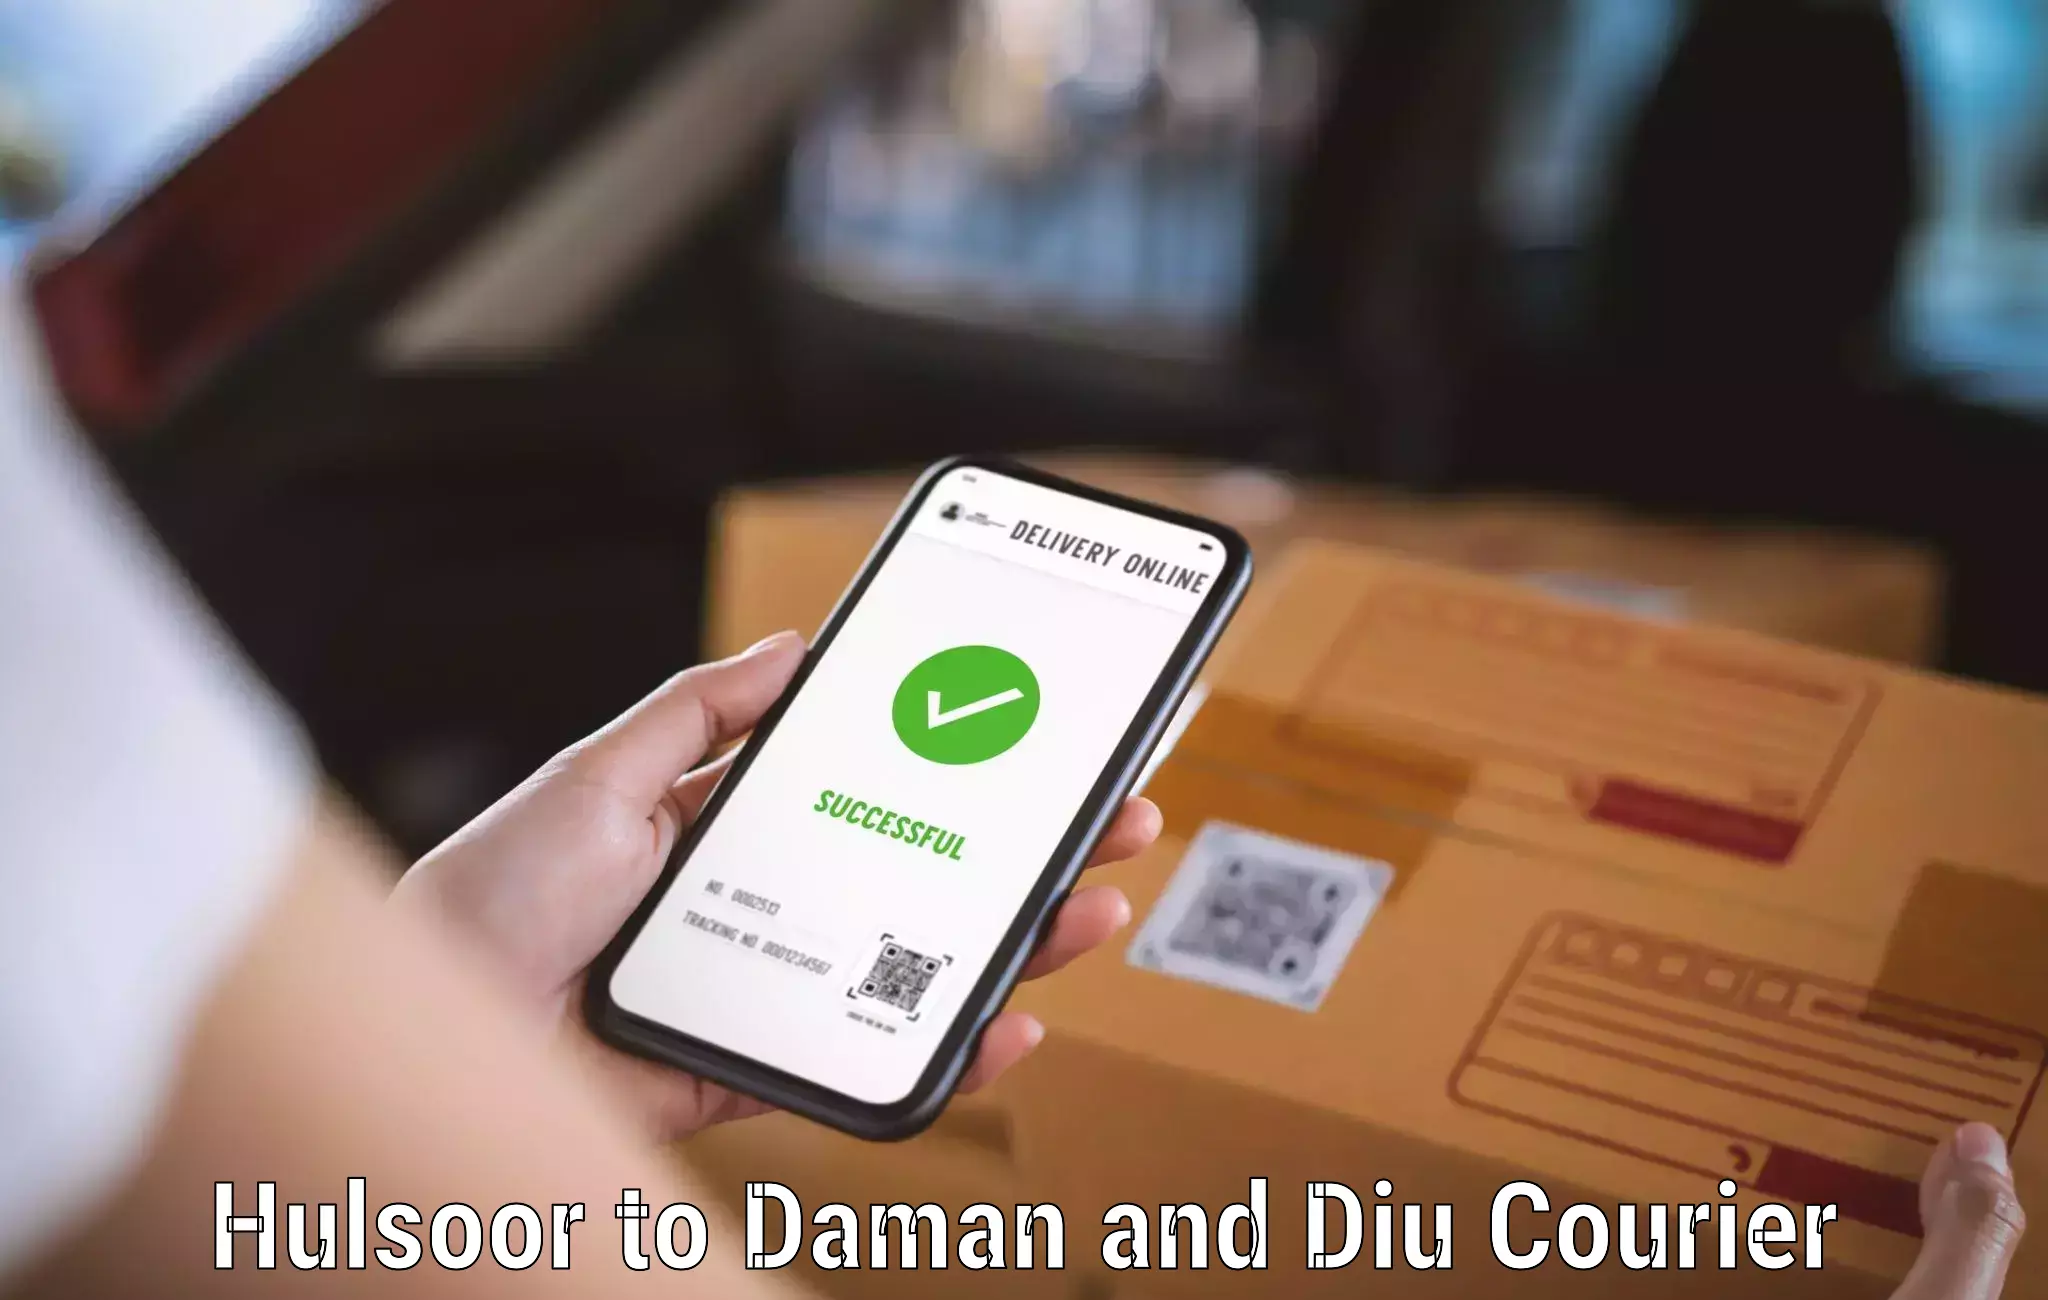 Nationwide parcel services Hulsoor to Daman